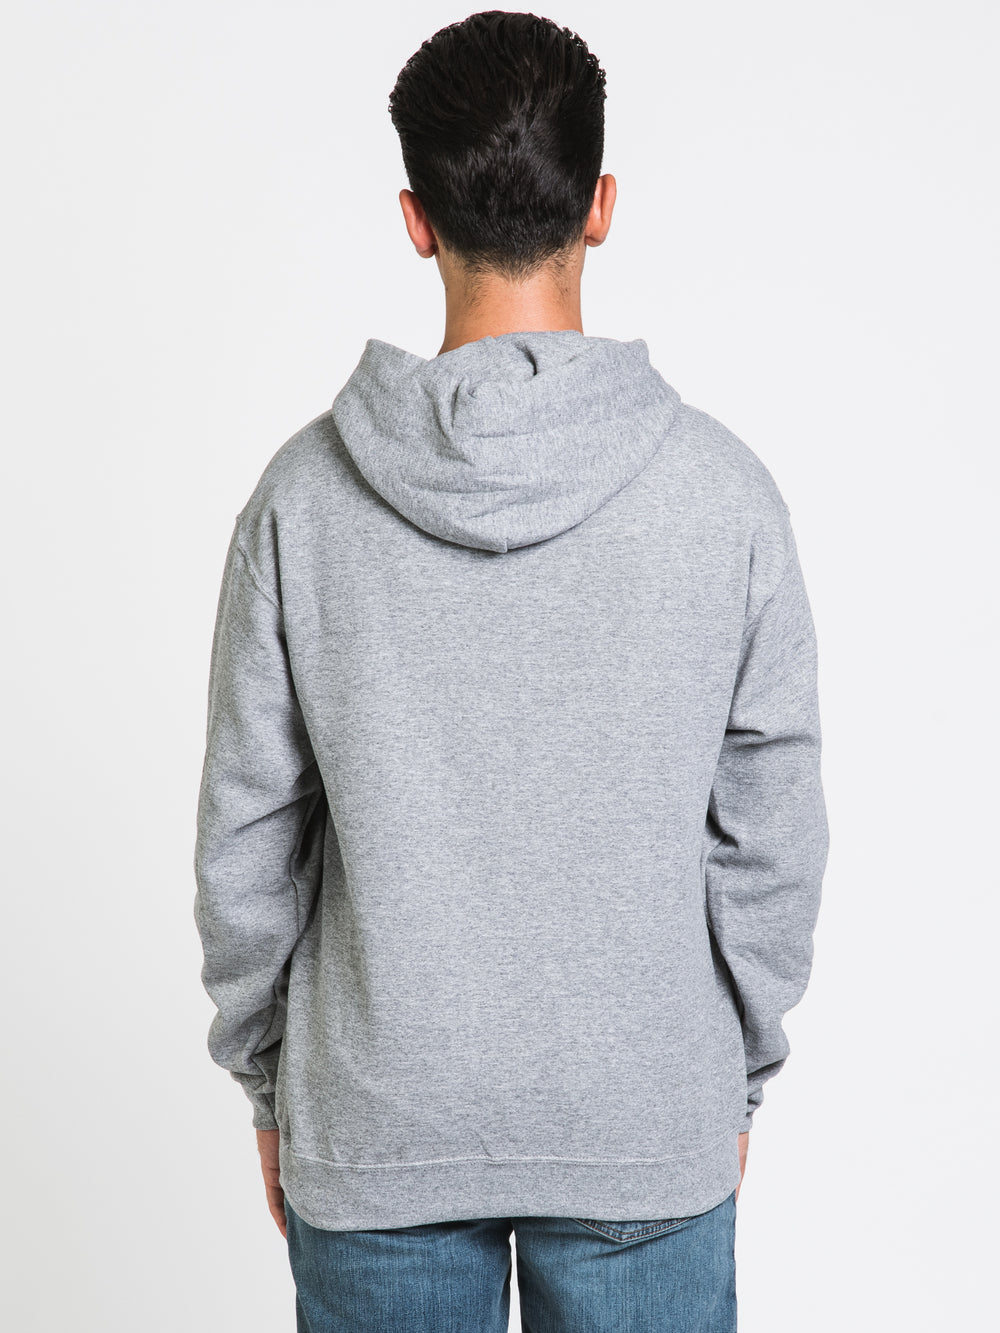 HOTLINE APPAREL YING YANG EMBROIDERED HOODIE  - CLEARANCE